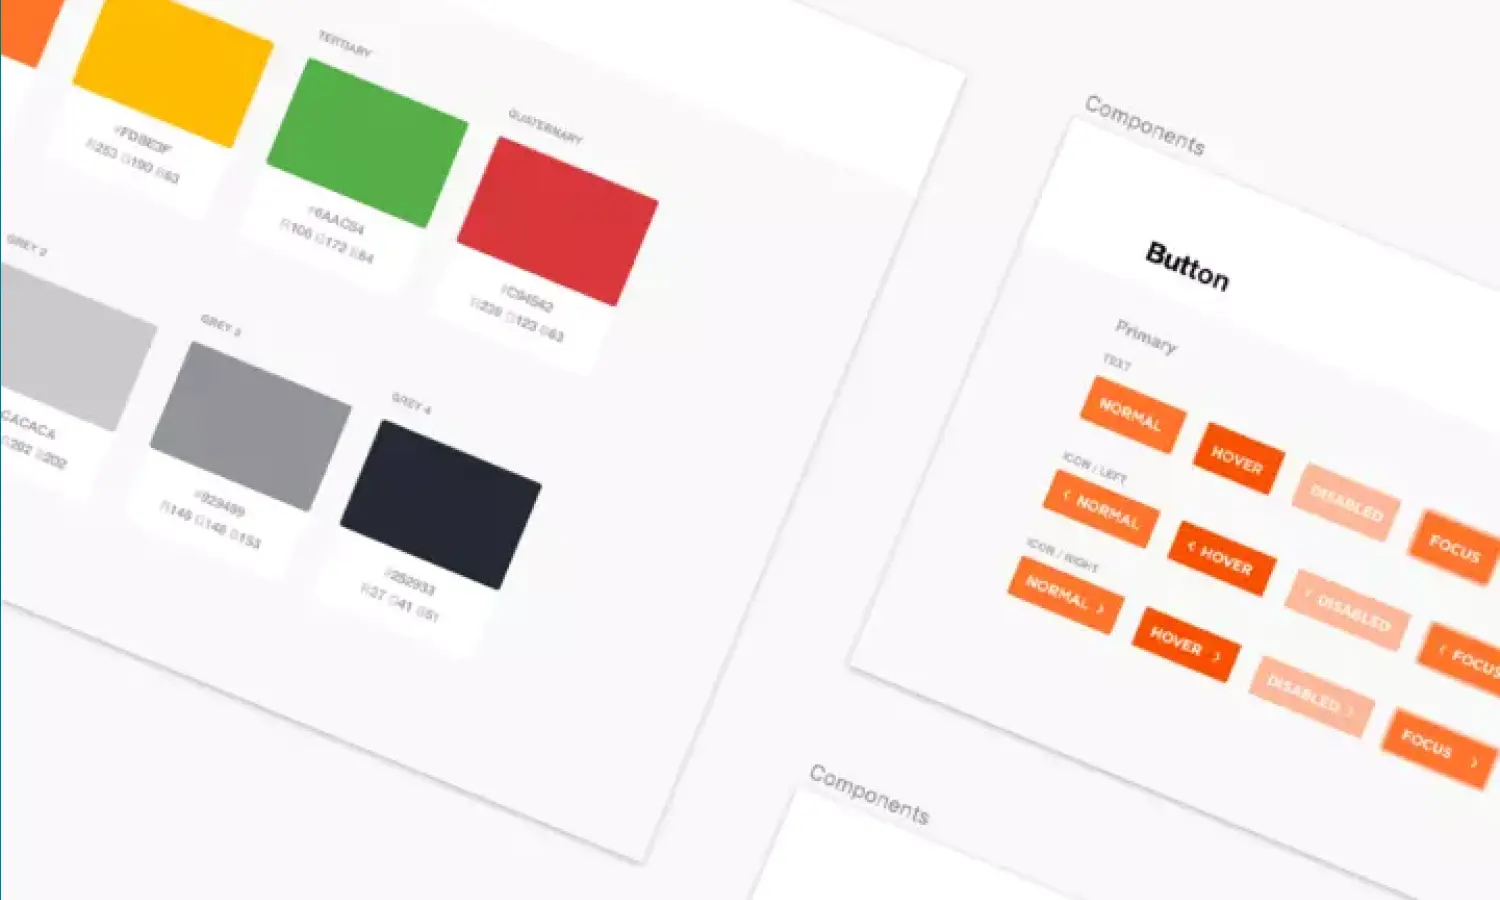 Design File to Design System: A practical guide